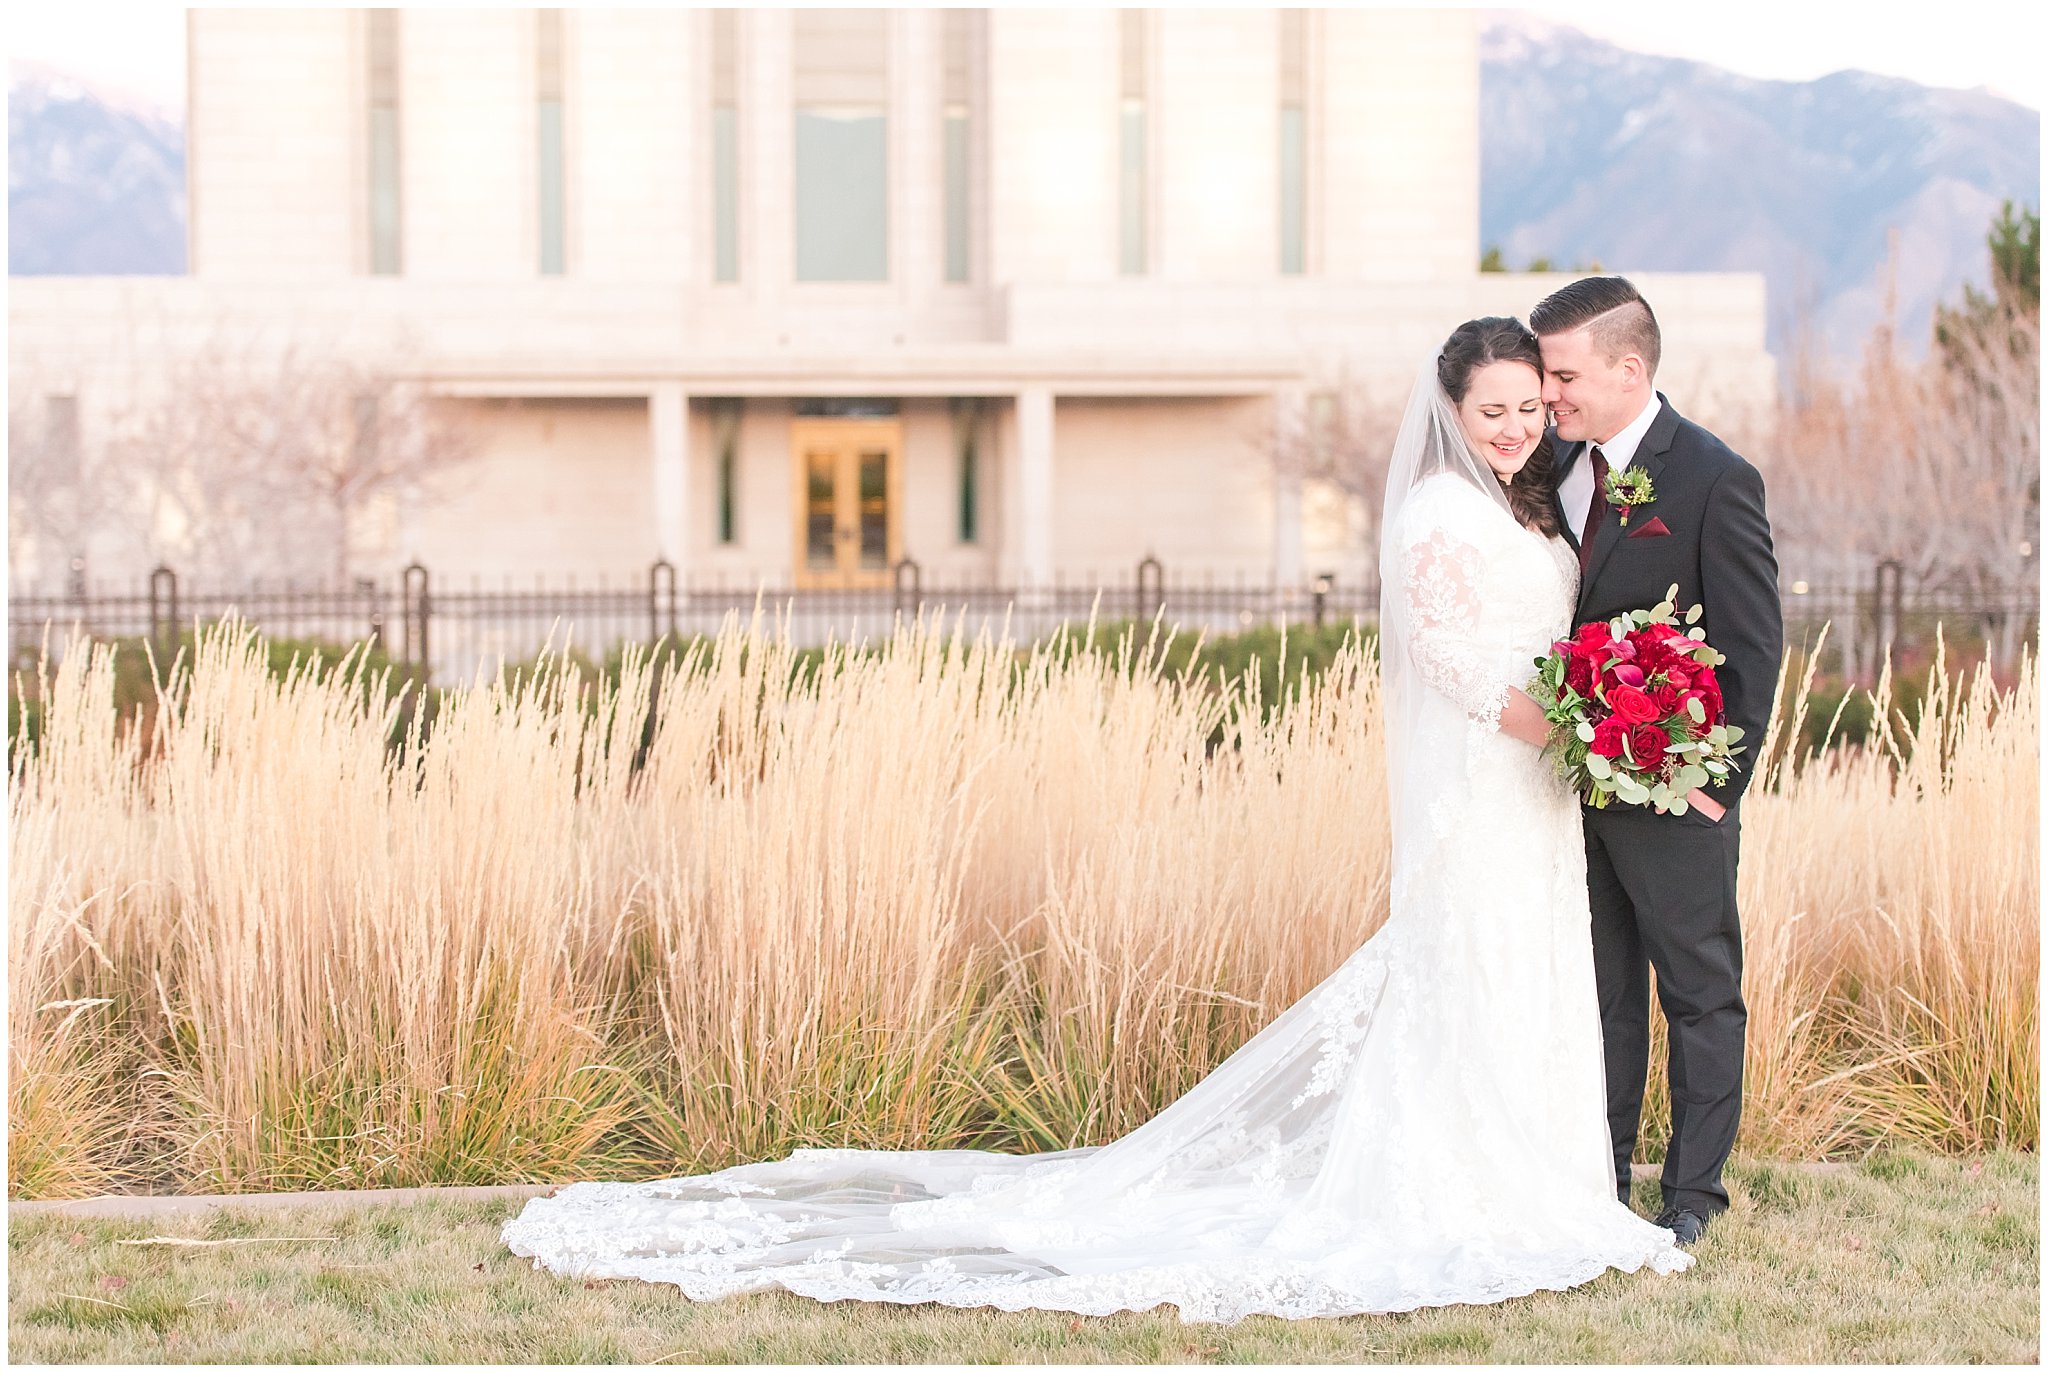 Bride in lace dress and veil with red floral Christmas theme bouquet and groom in black suit with burgundy tie | Utah mountains purple at sunset | oquirrh mountain temple winter formal session | Jessie and Dallin Photography